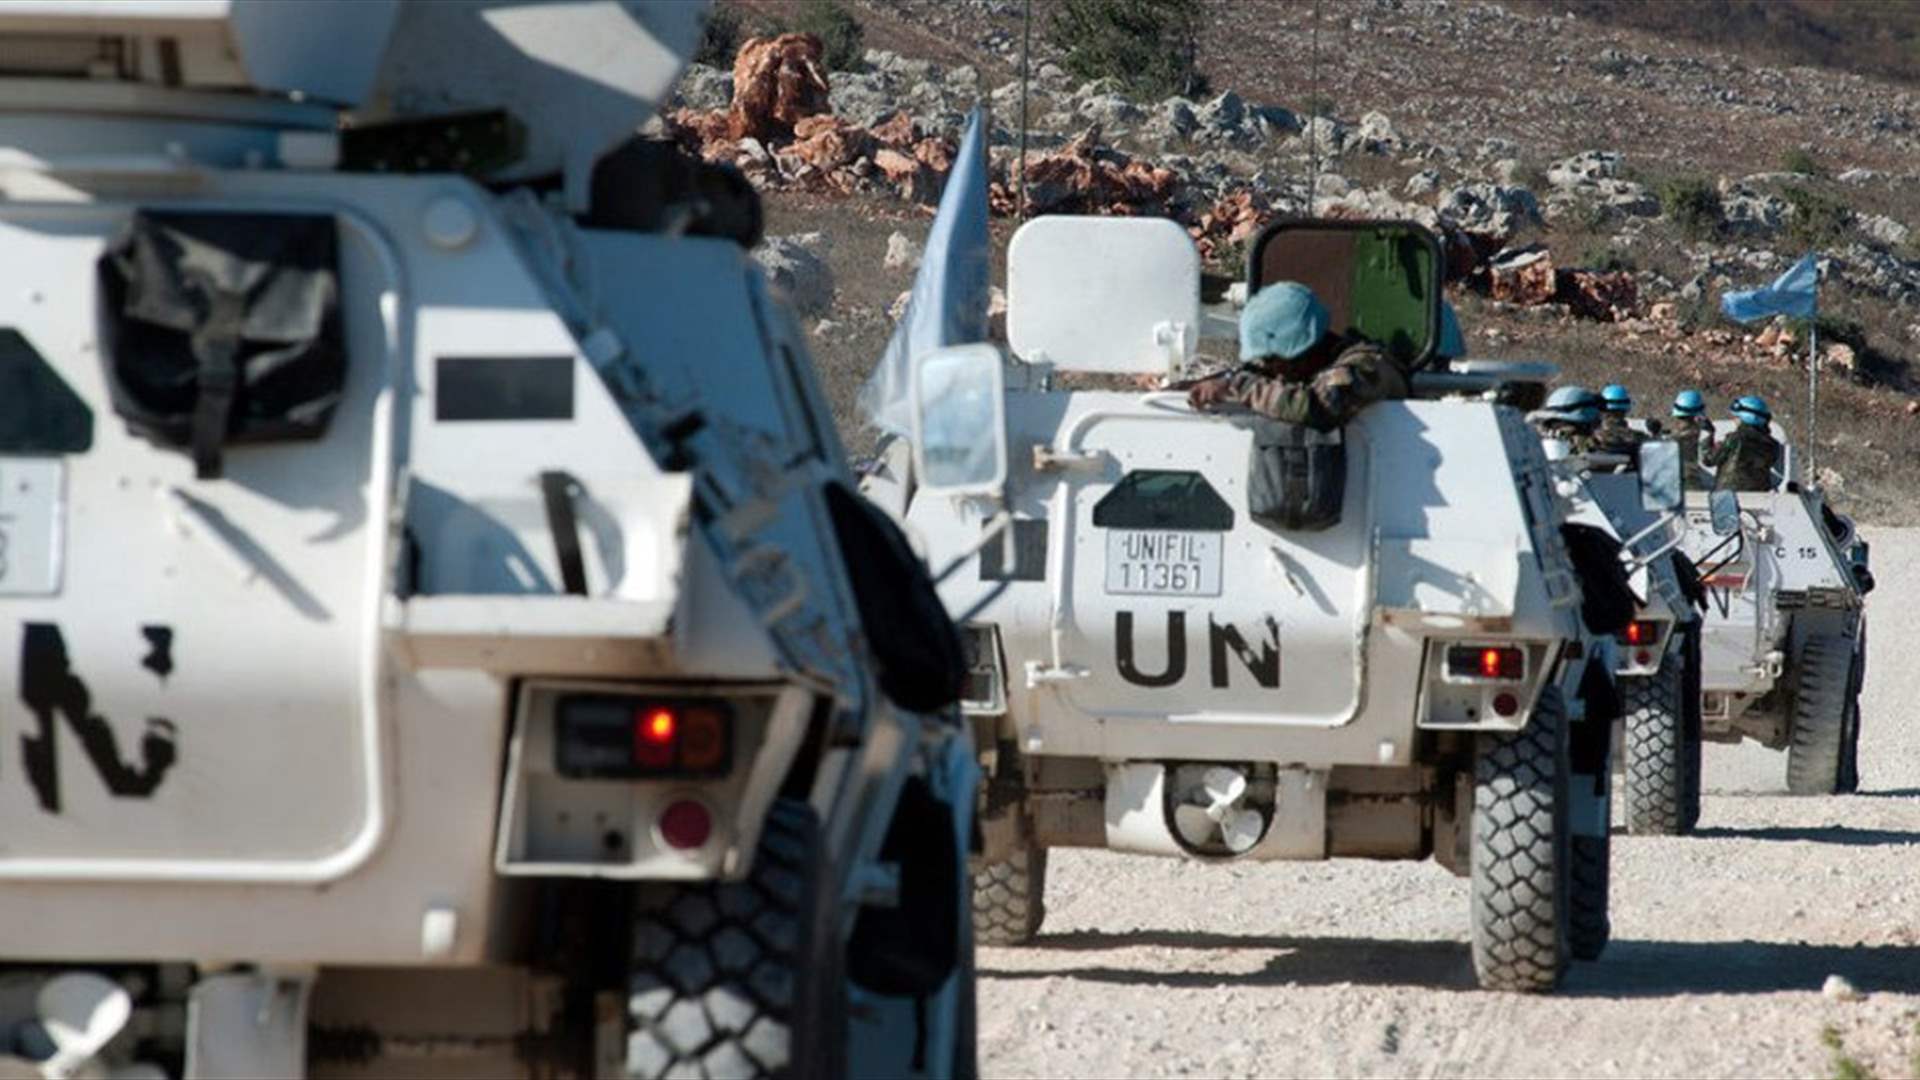 UNIFIL incident: Indian Contingent vehicle overturns, three personnel injured, one critically